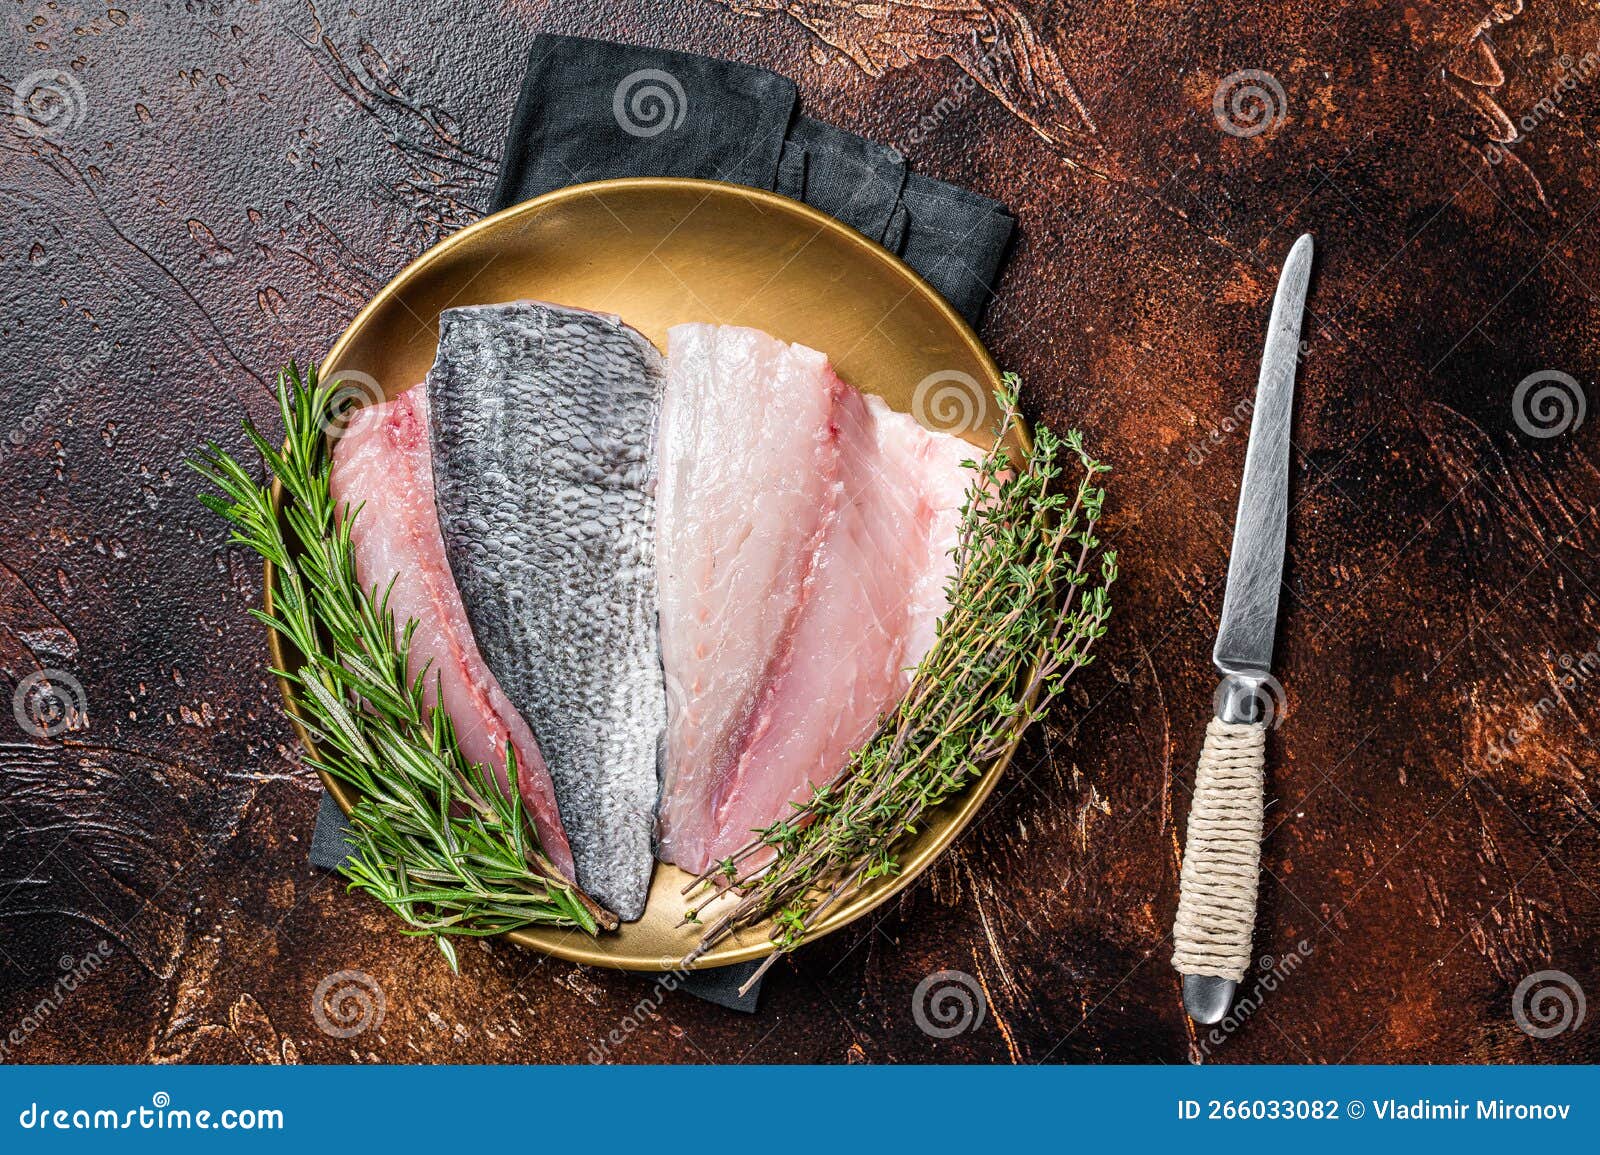 fresh raw gilthead sea bream fish fillets ready for cooking. dark background. top view